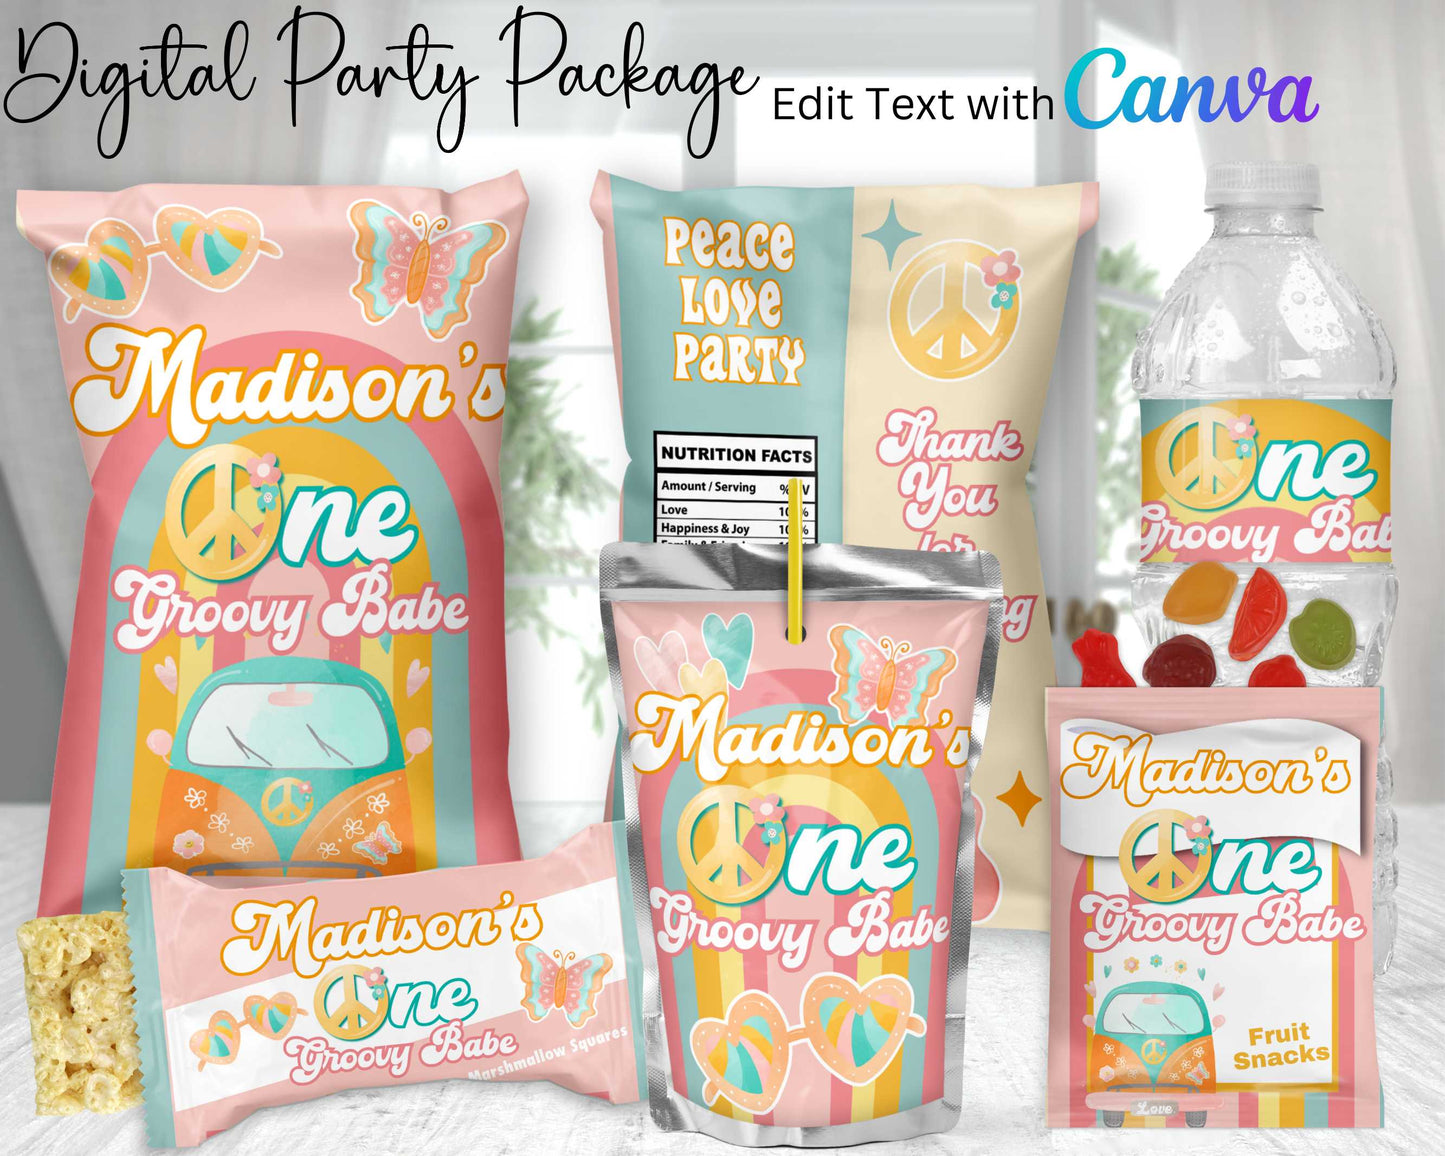 One Groovy Babe Digital Party Package | Edit Text with Canva | You Edit | You Save | You Download | You Print | Digital File Only